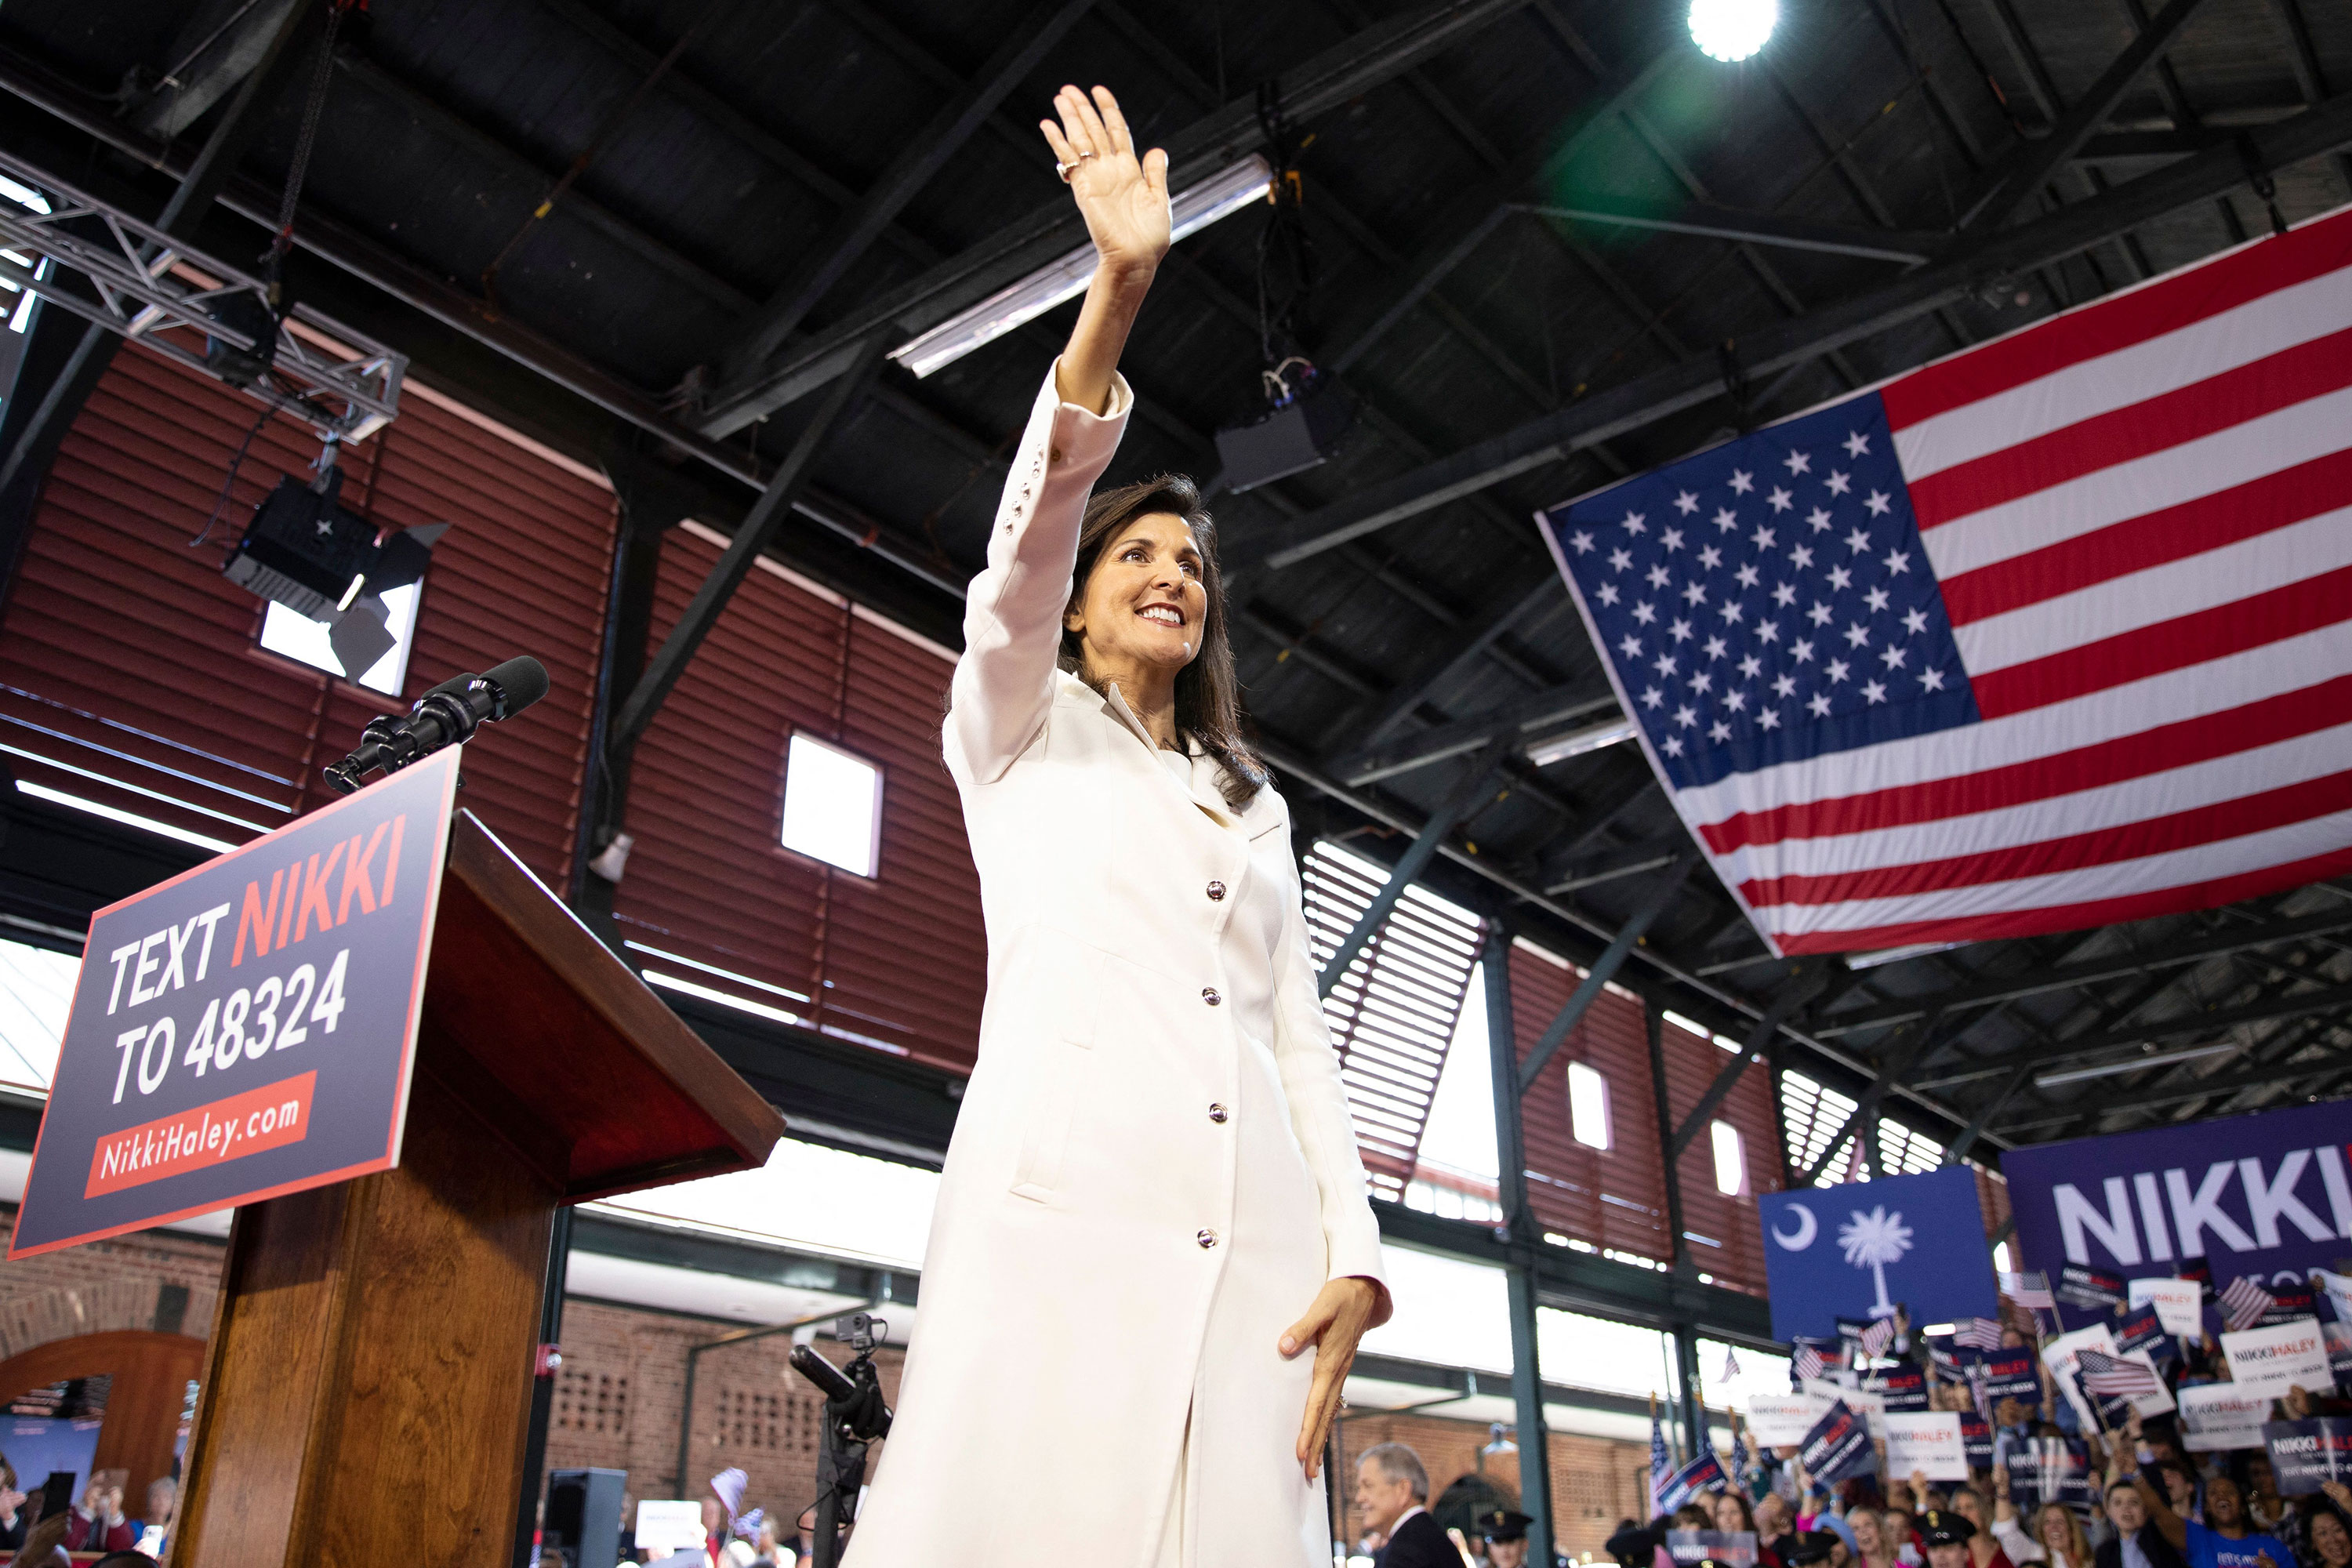 Former South Carolina Republican Gov. Nikki Haley waves during a campaign event at the Charleston Visitor Center in Charleston, South Carolina, on February 15. 